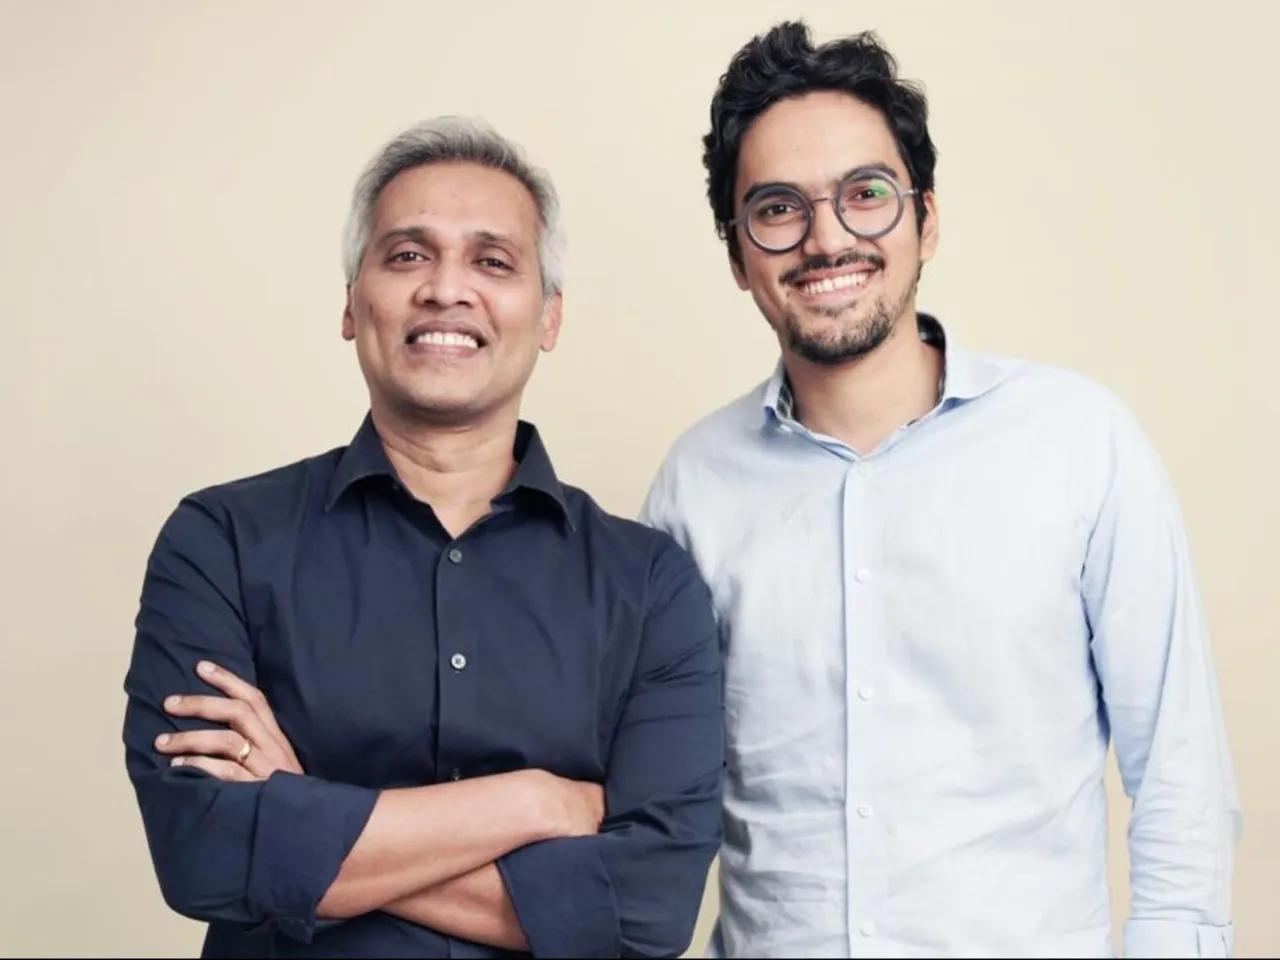  The Good Bug Founders